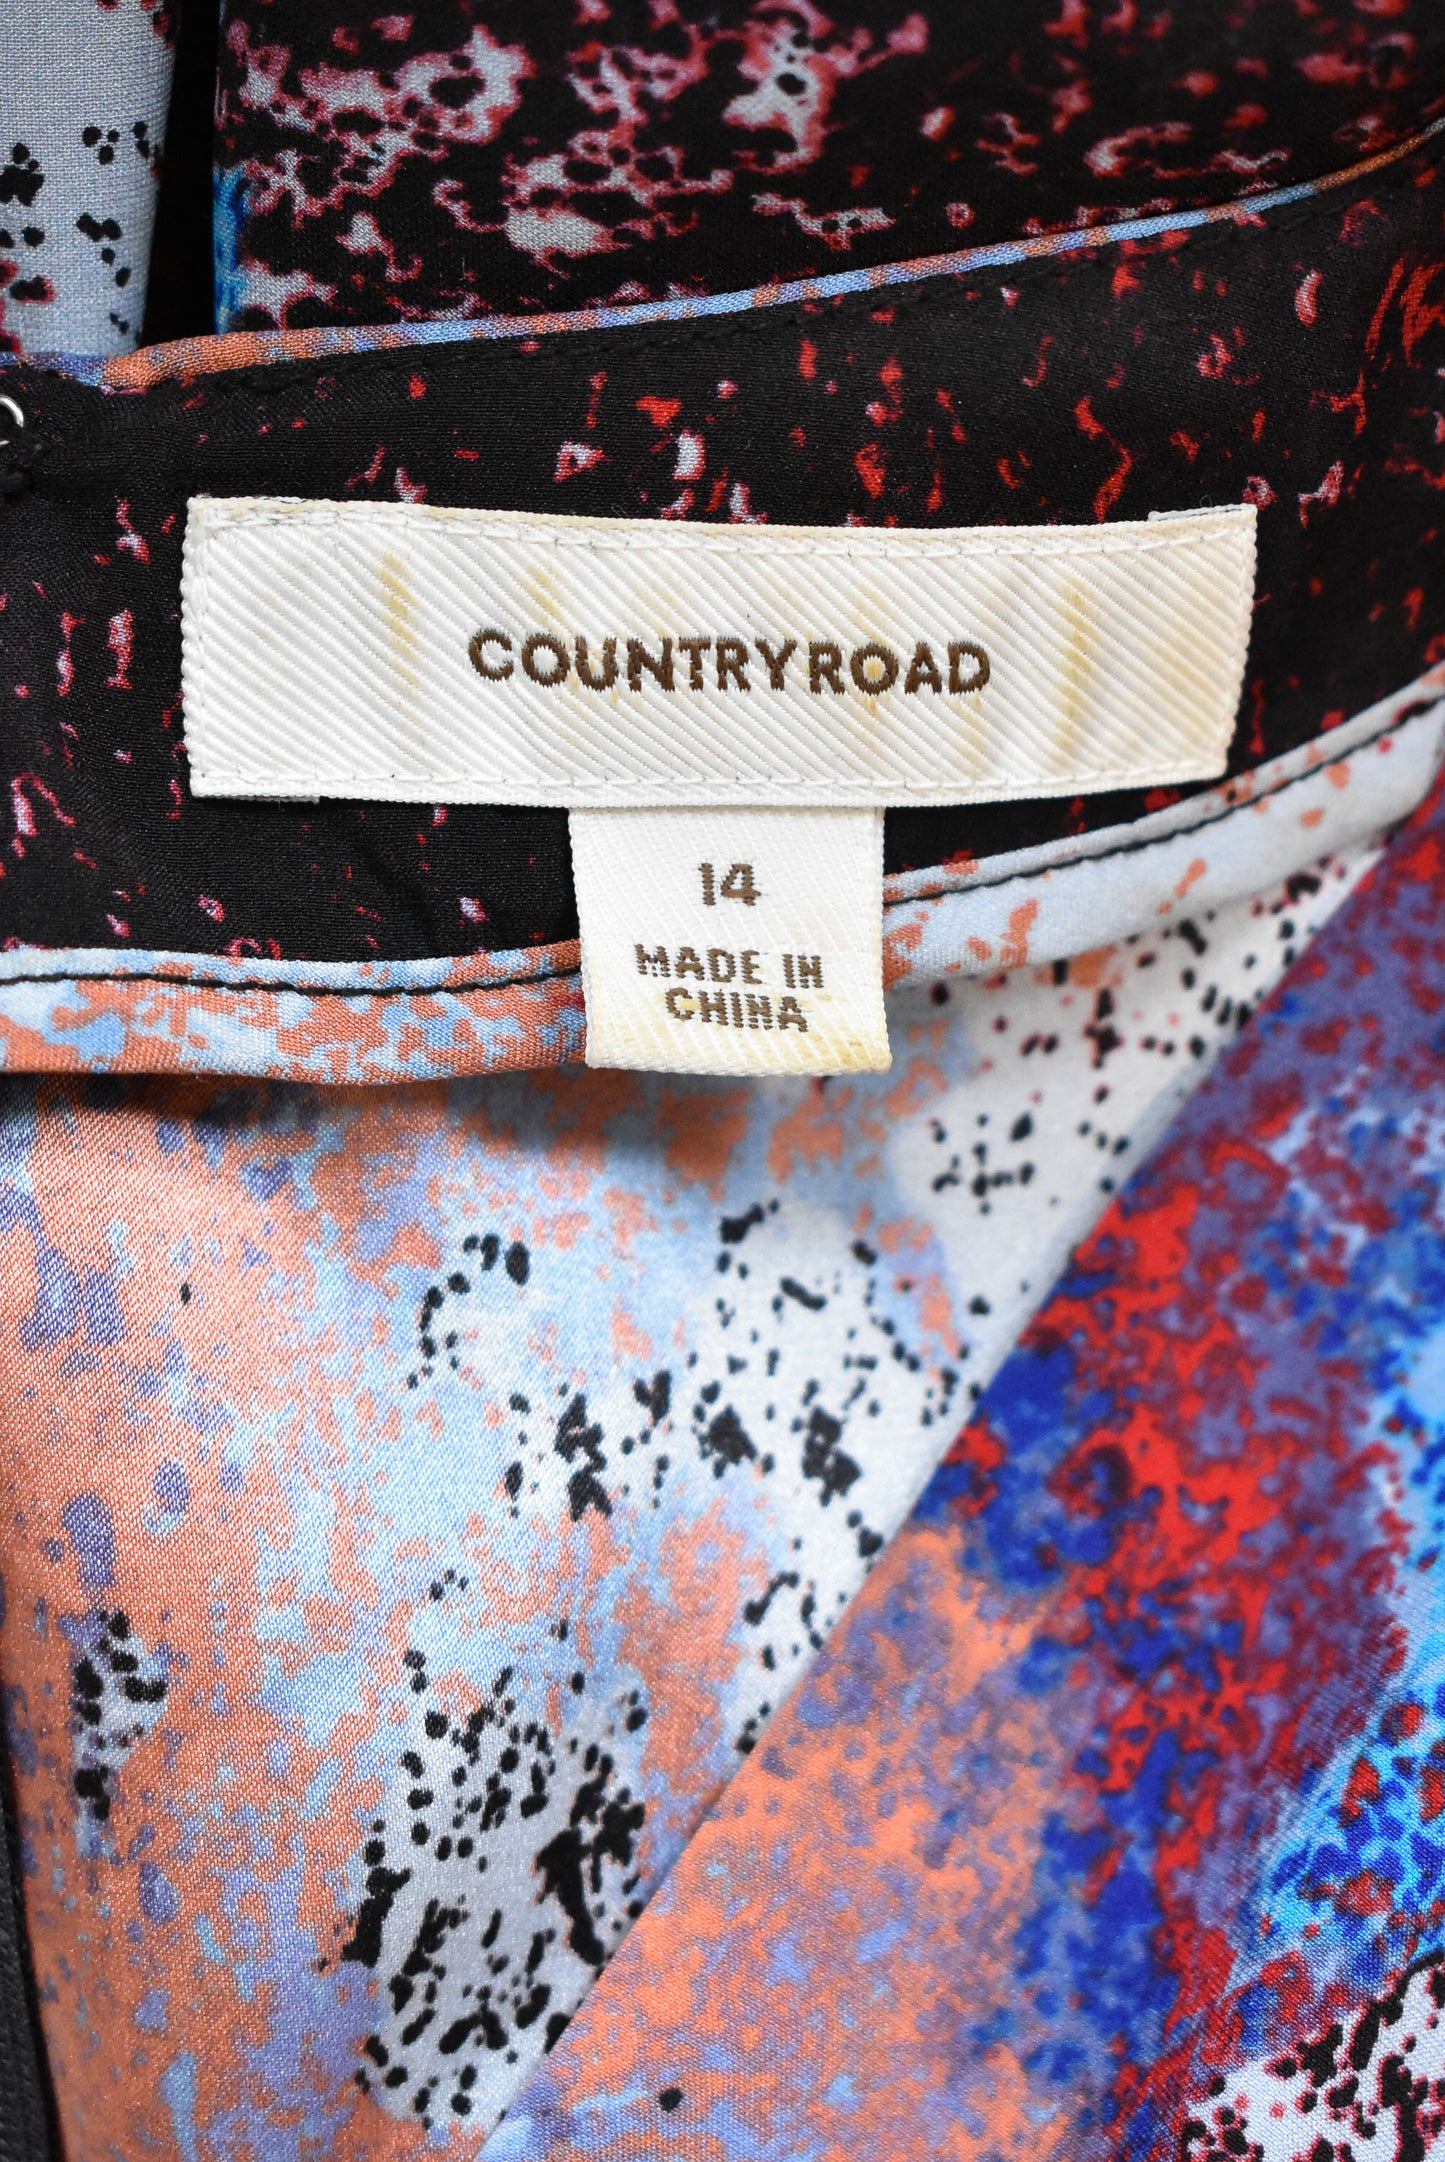 Country Road silk dress, 14